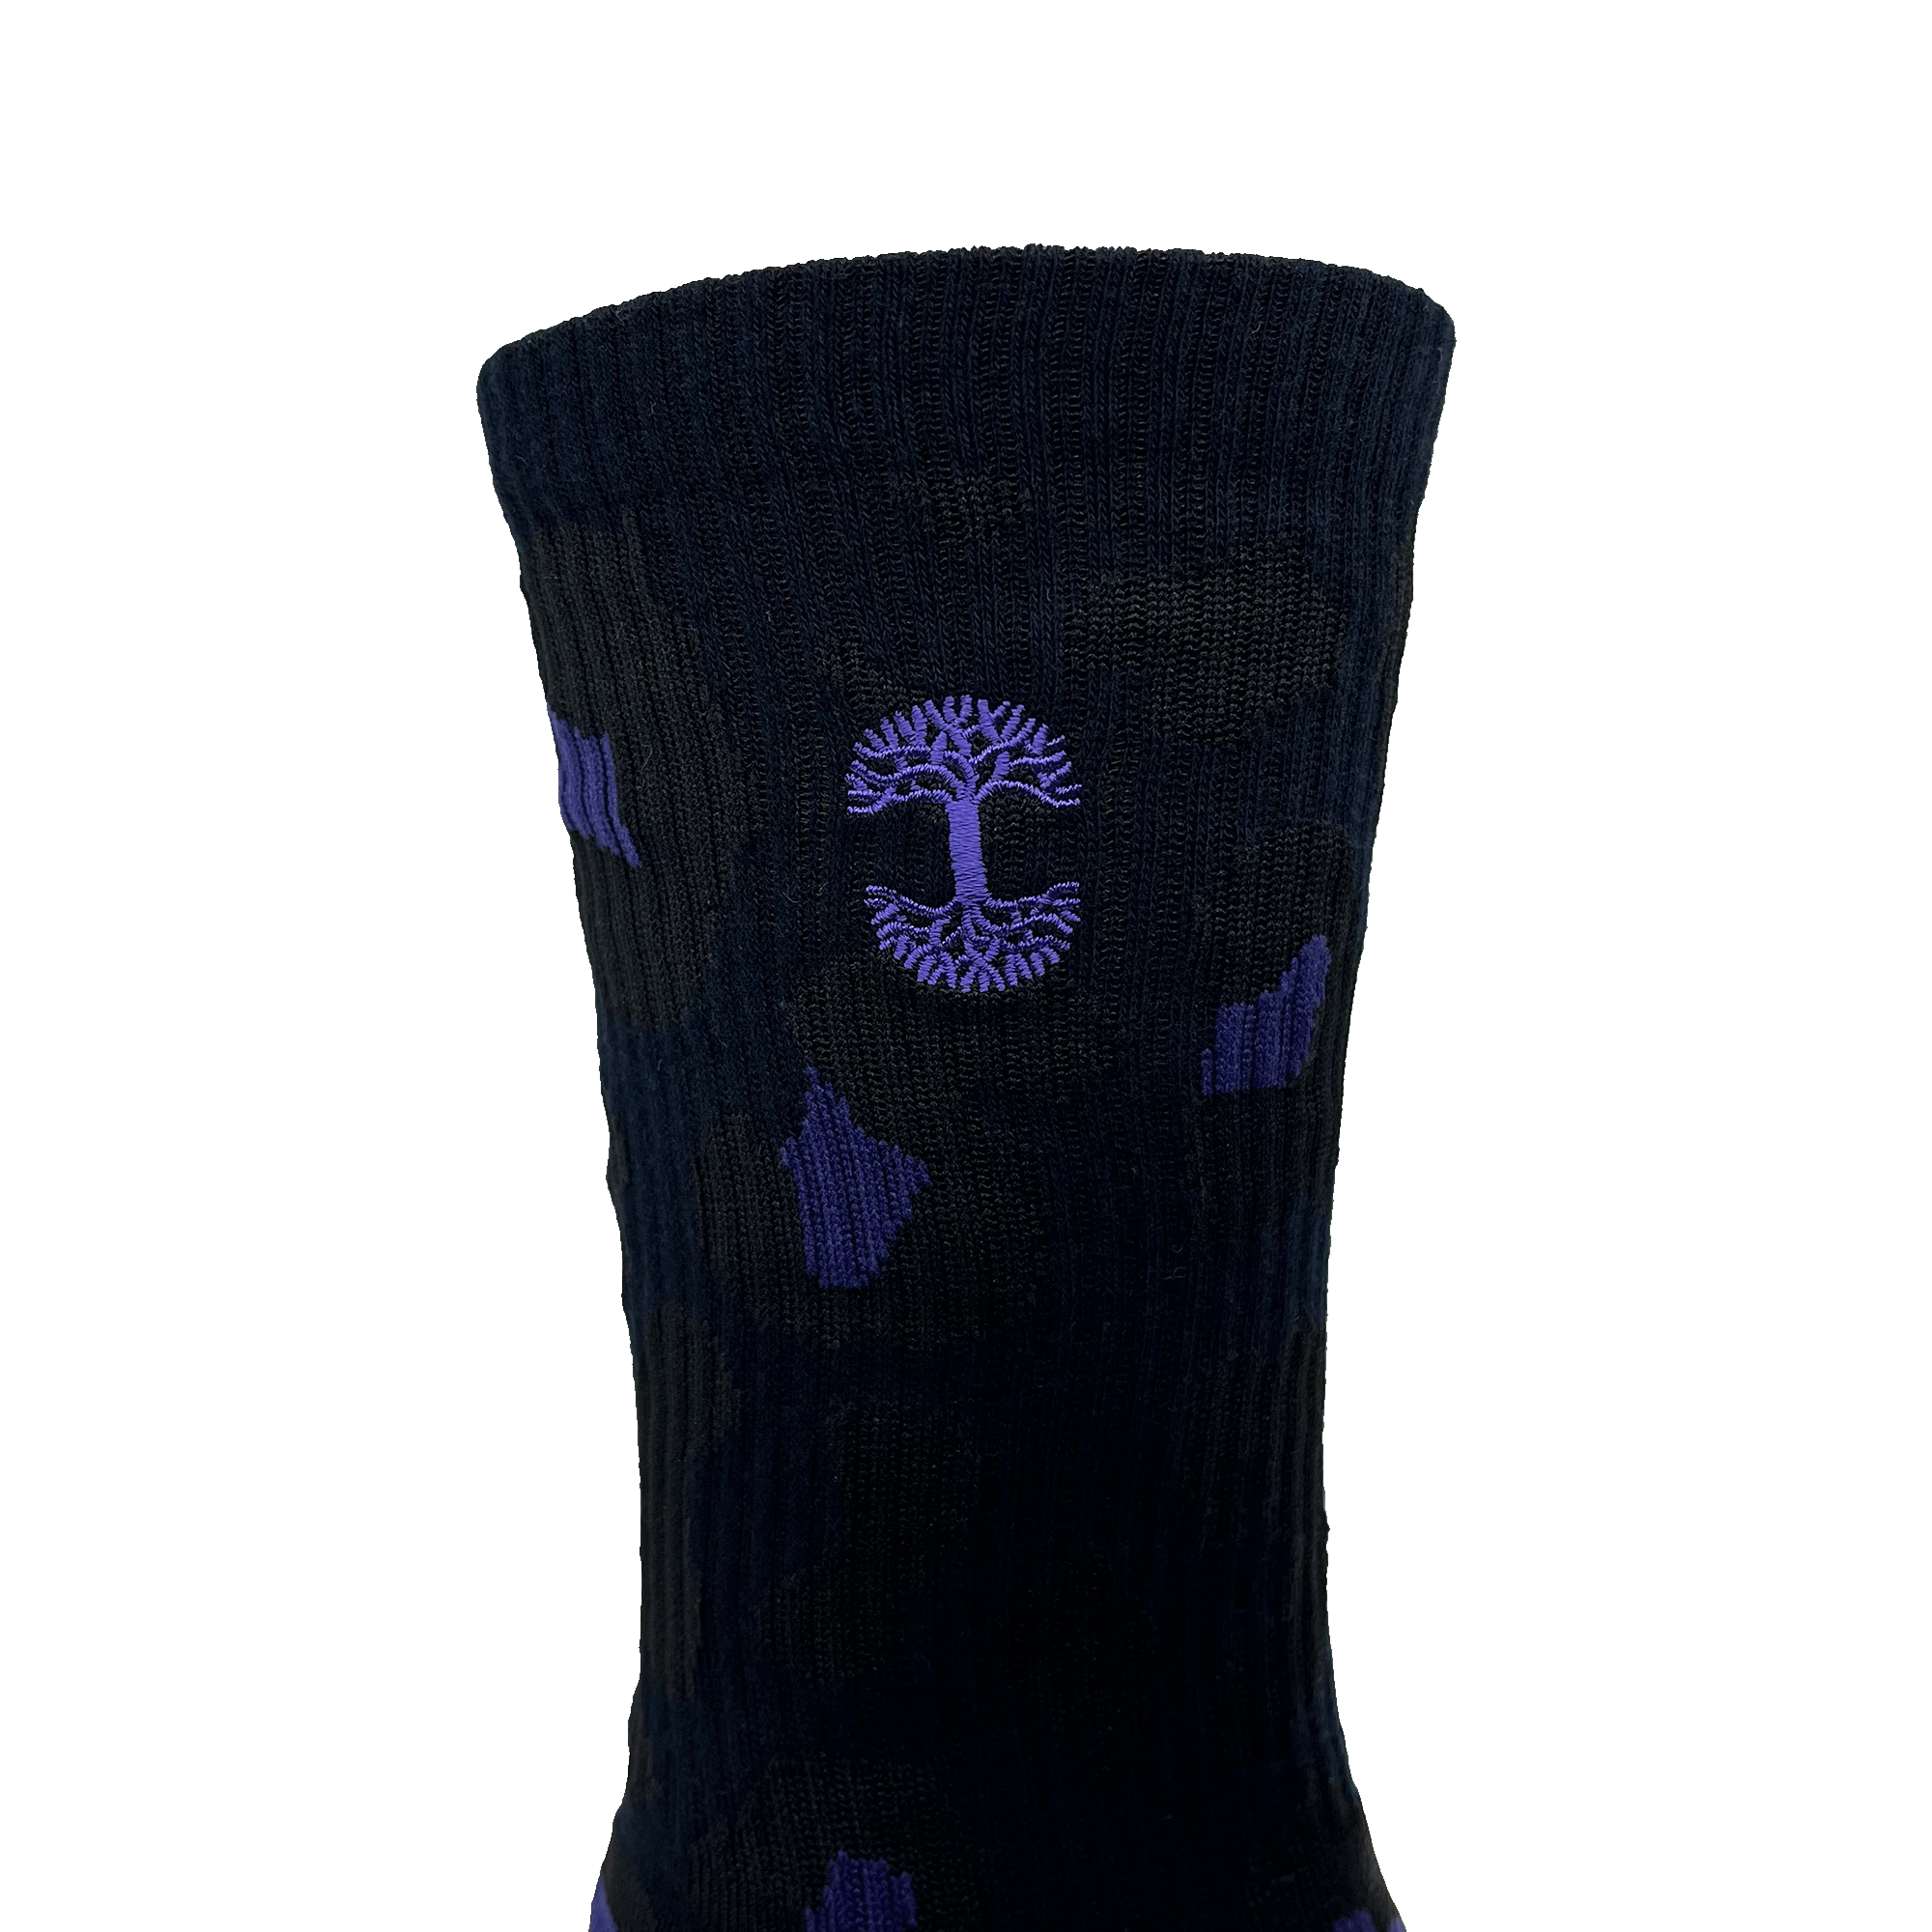 Close-up of embroidered small blue Oaklandish tree logo on the side of black and blue crew sock.